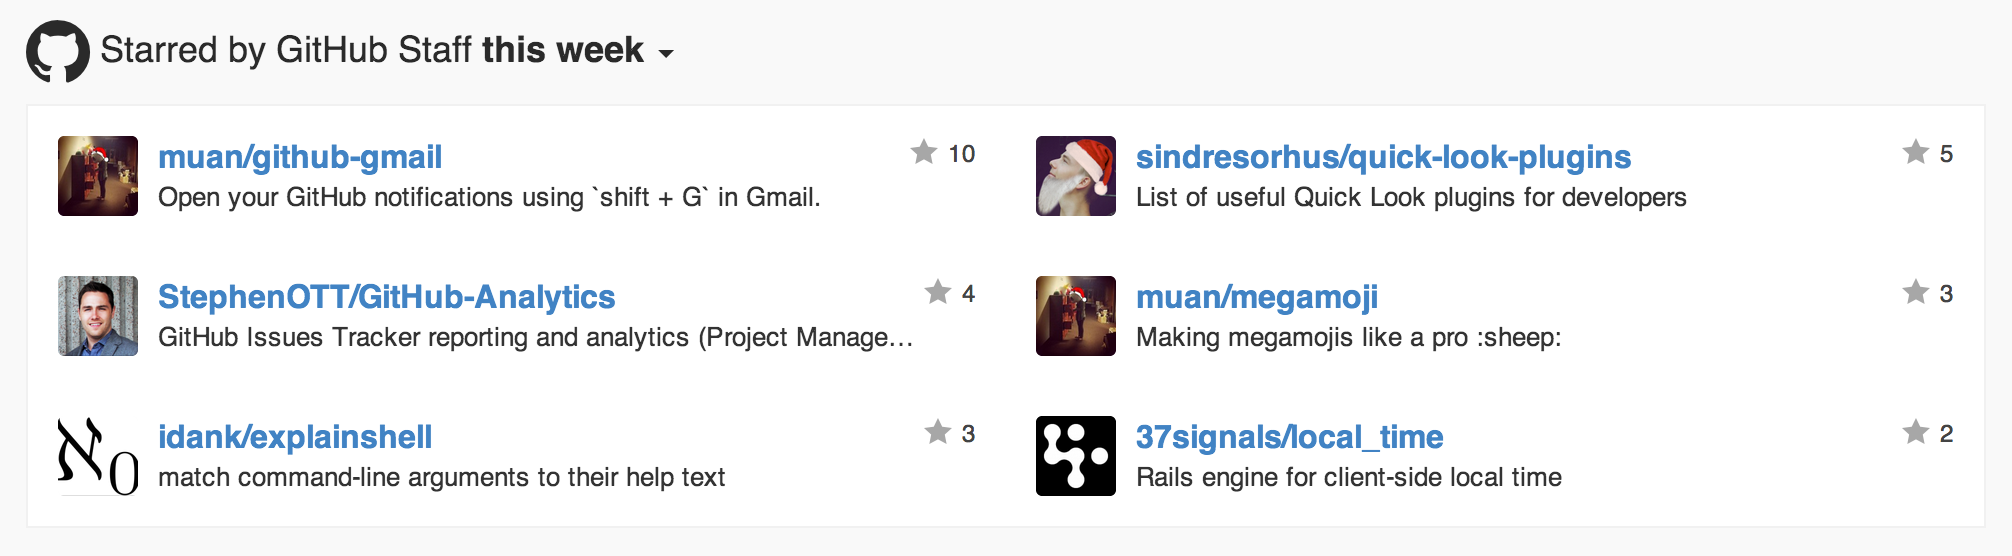 Starred by GitHub staff